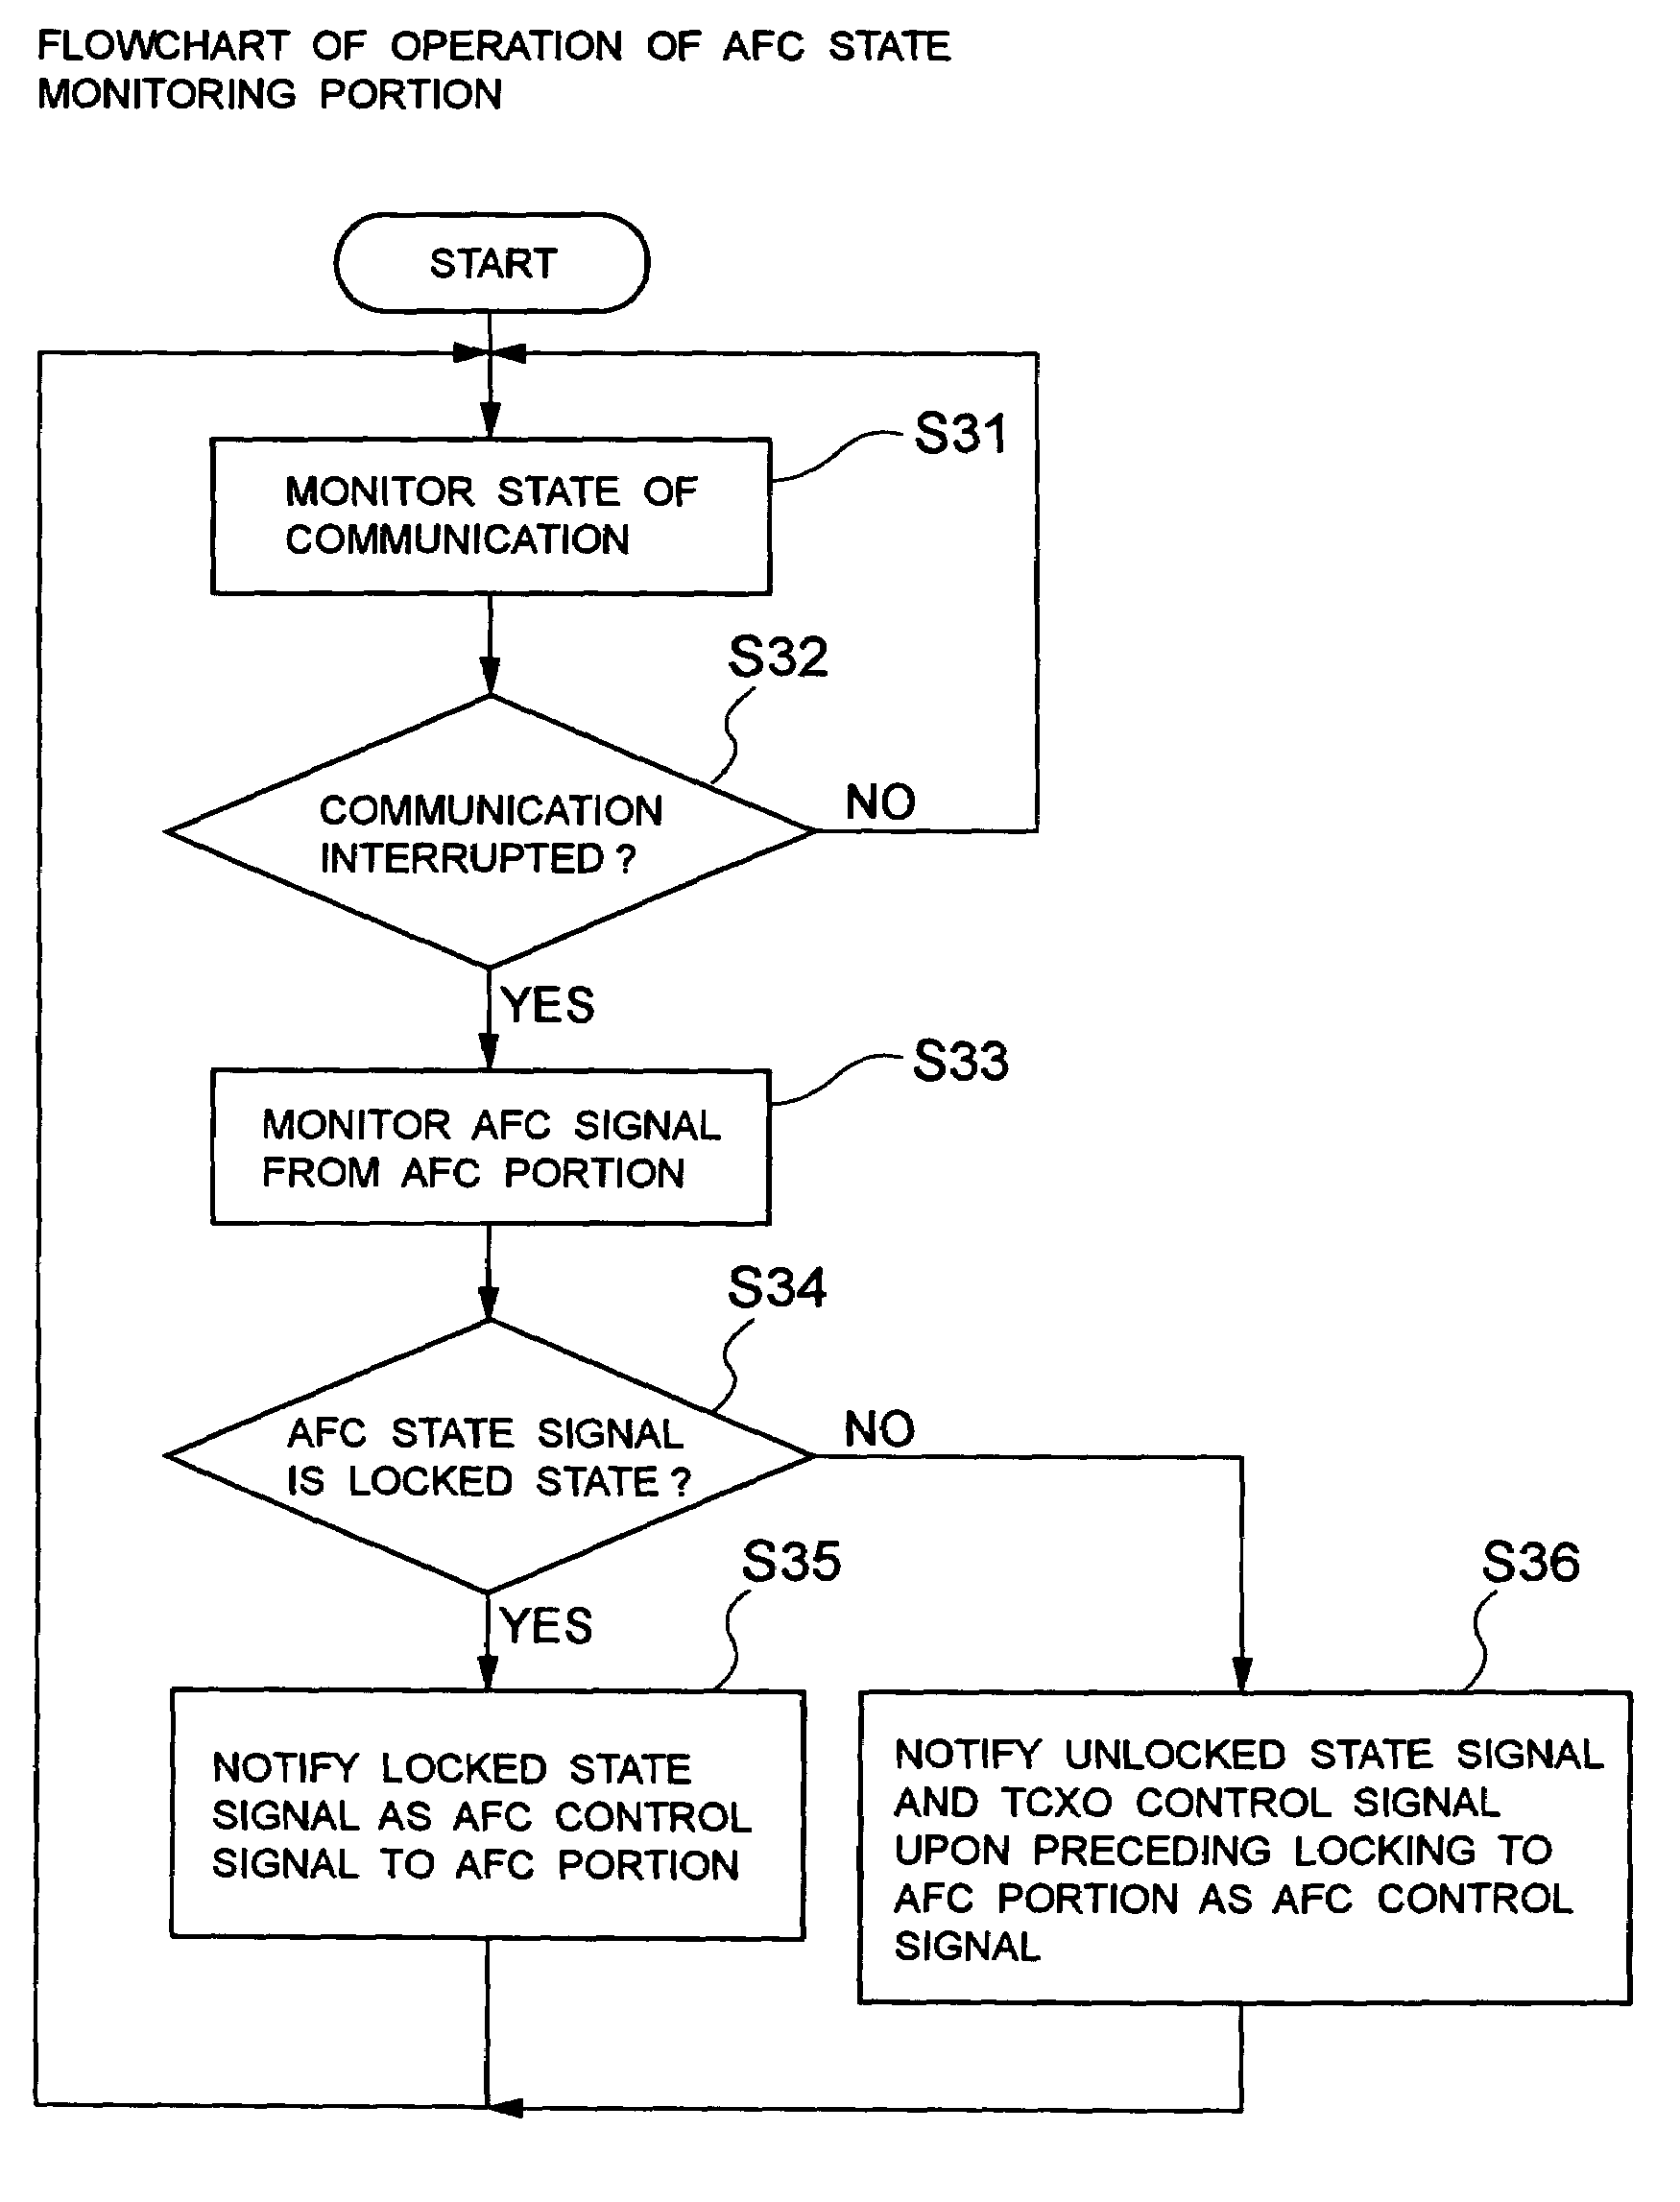 Automatic frequency control system, operation control method thereof and mobile communication device using the same